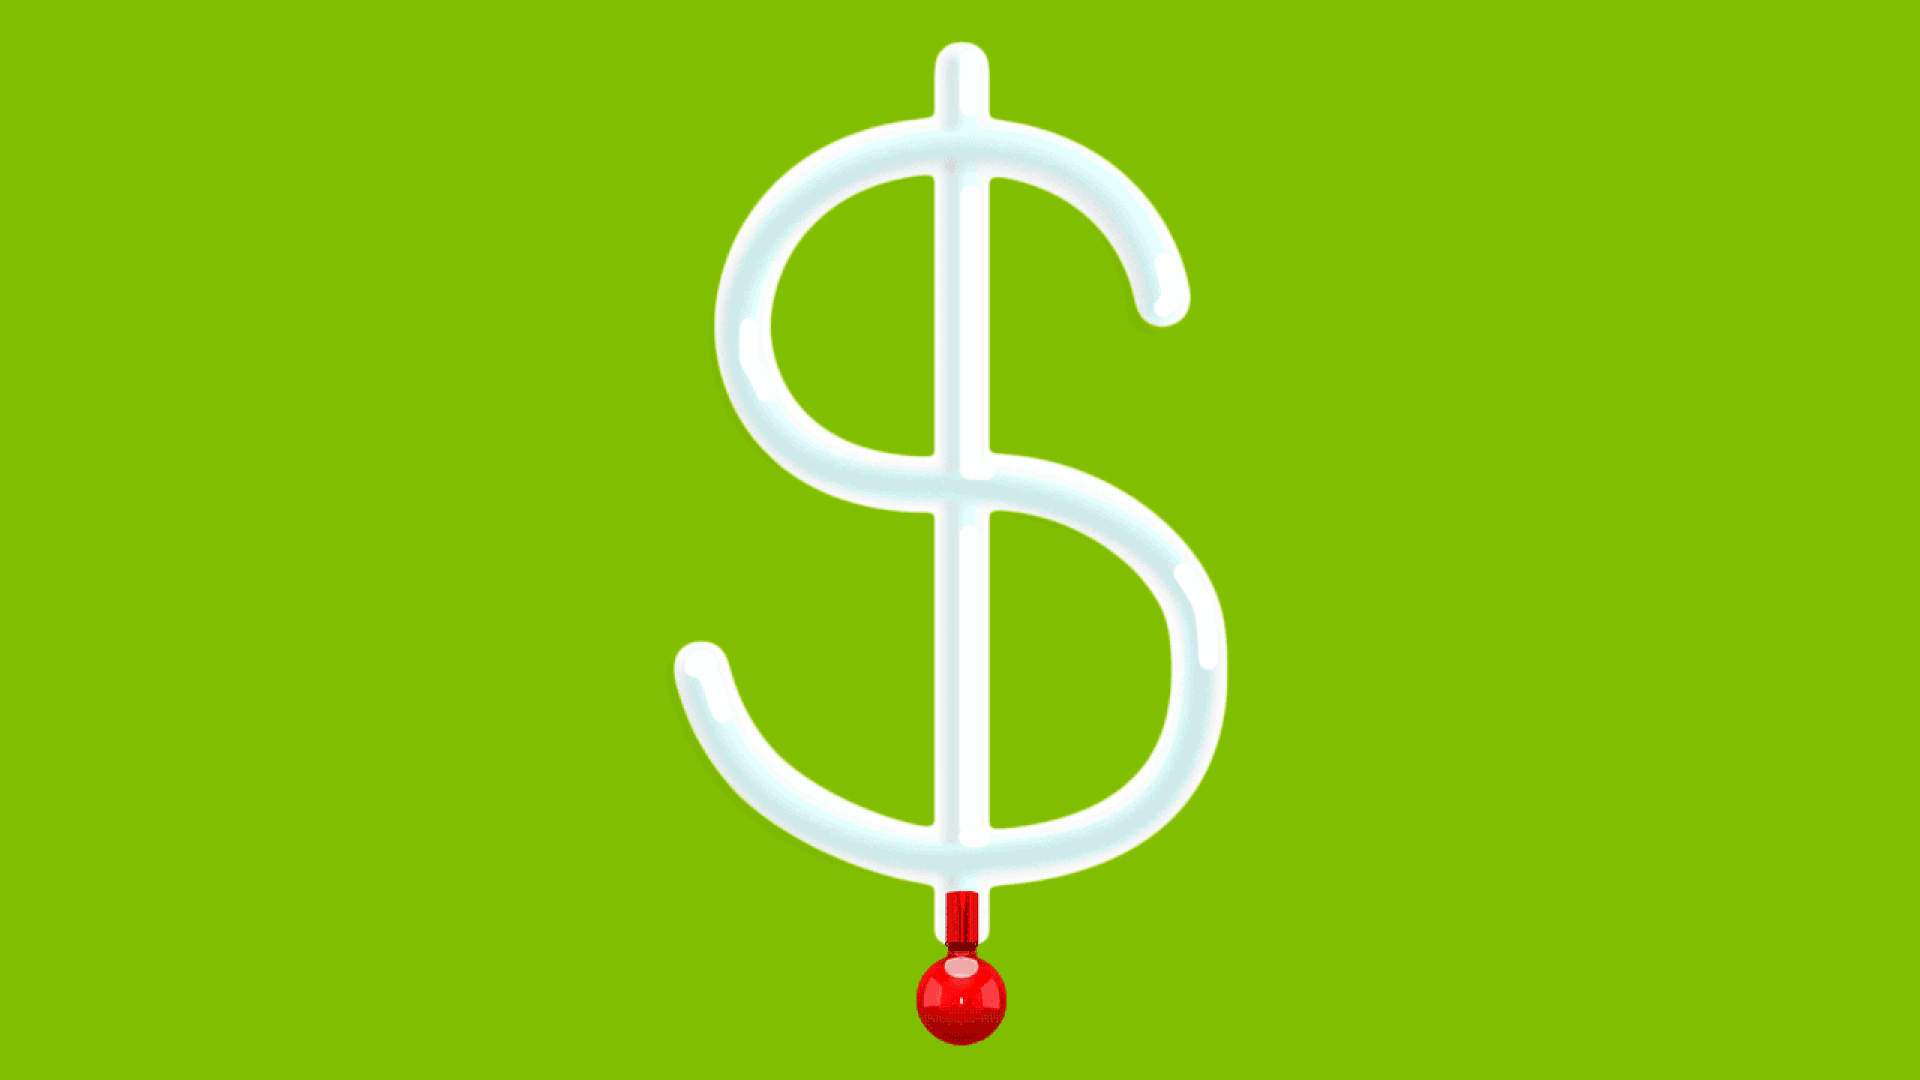 Animated illustration of a thermometer in the shape of a dollar bill sign, with temperature rising rapidly